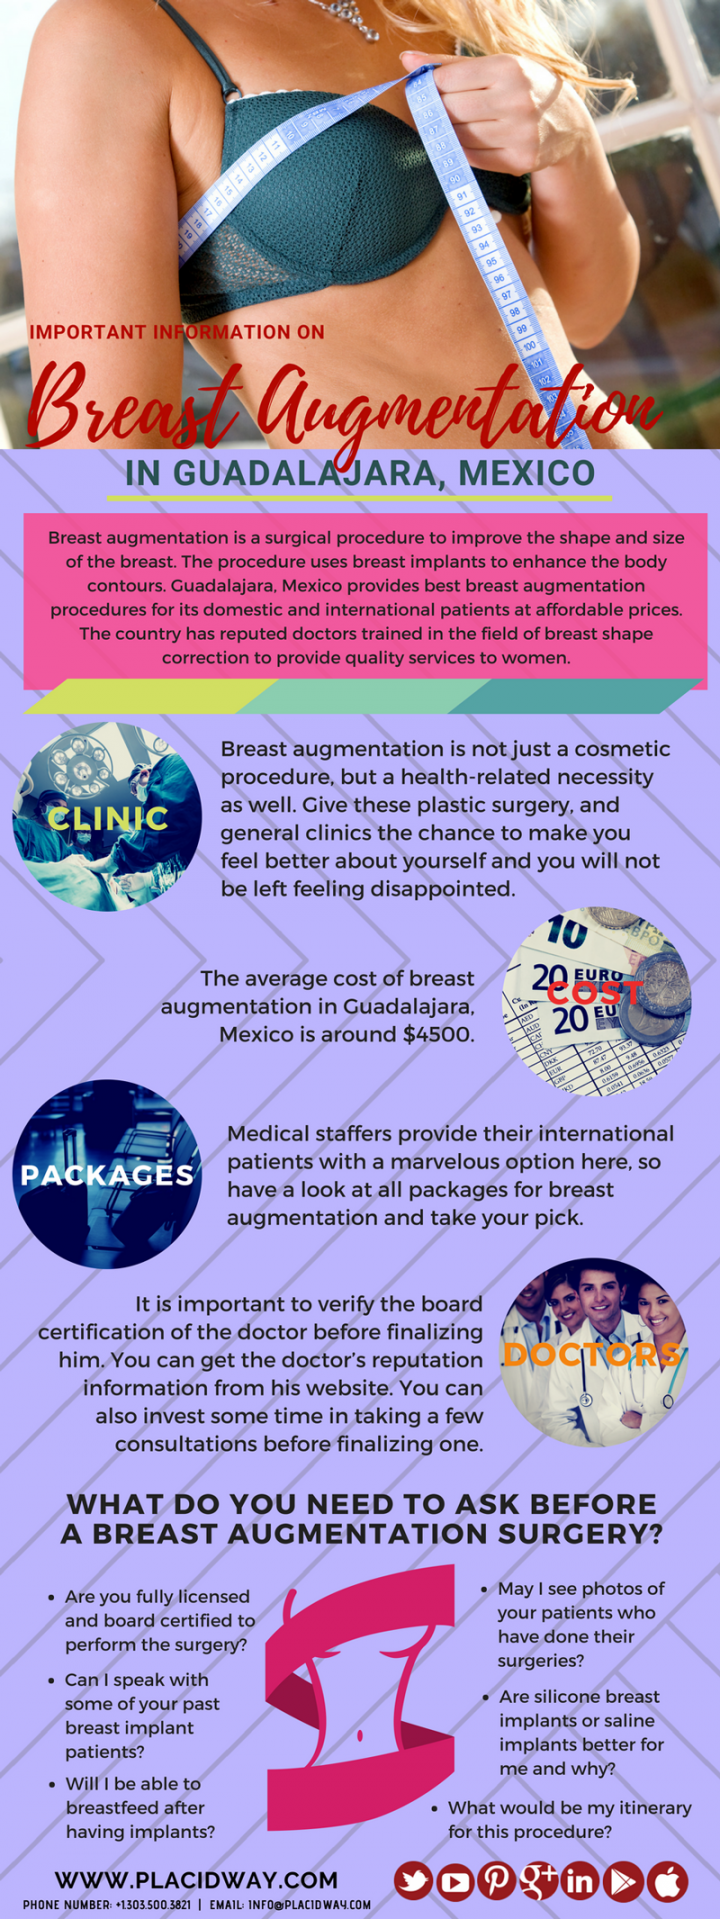 Infographics: Important Information on Breast Augmentation in Guadalajara, Mexico